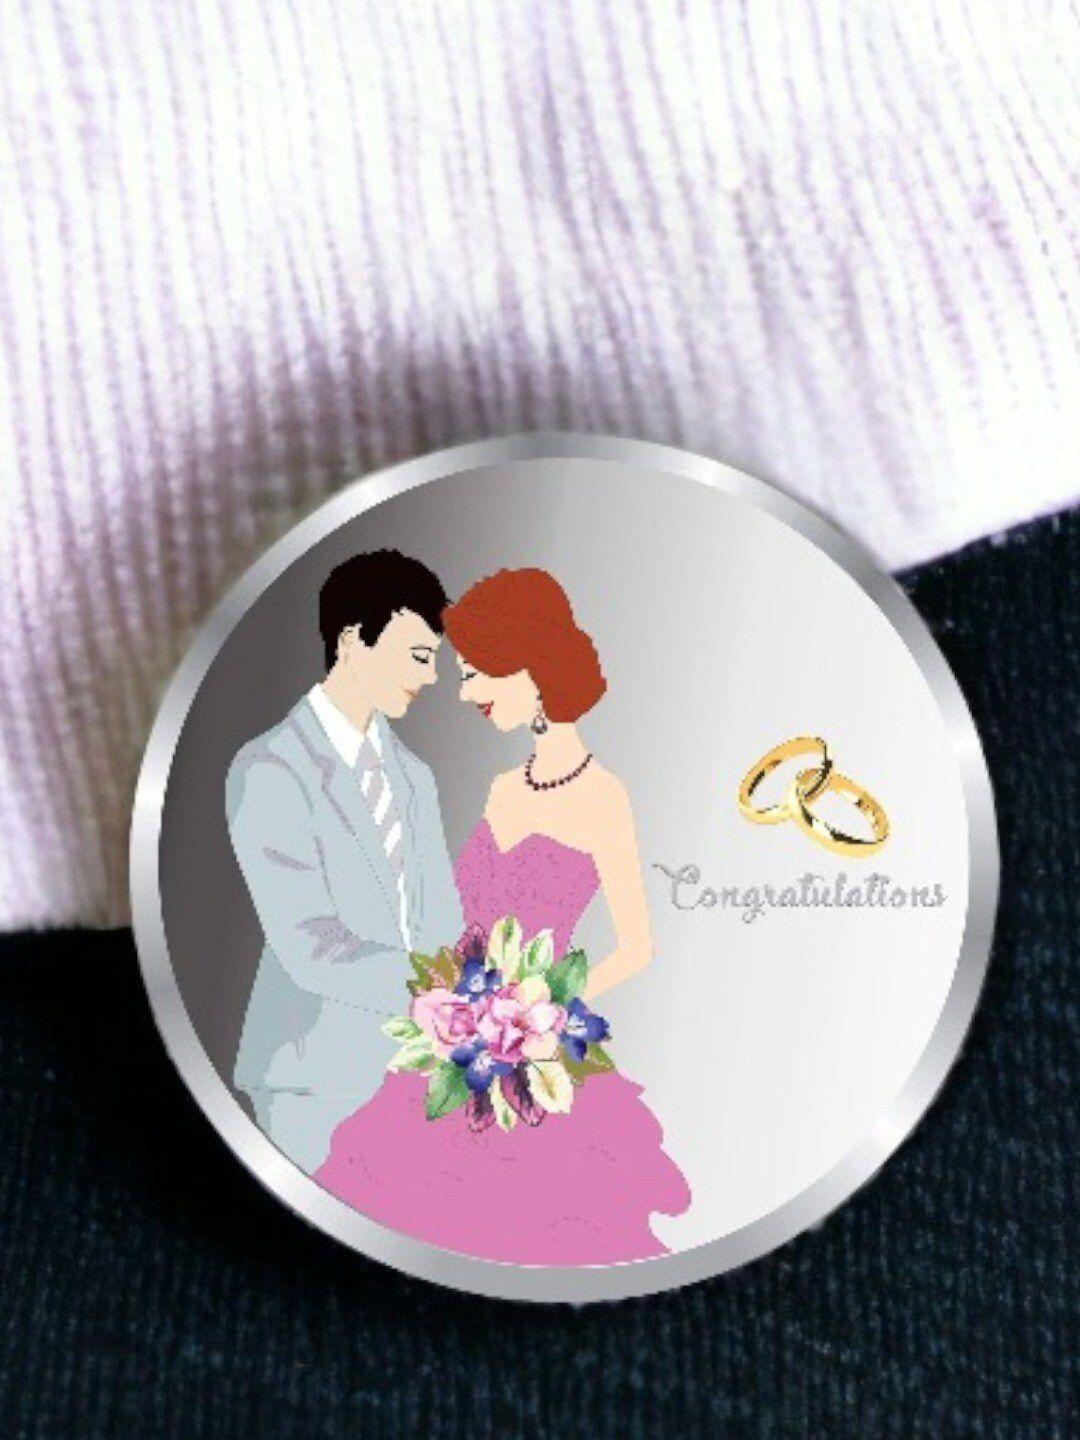 taraash married couple 999 round silver coin-20 gm